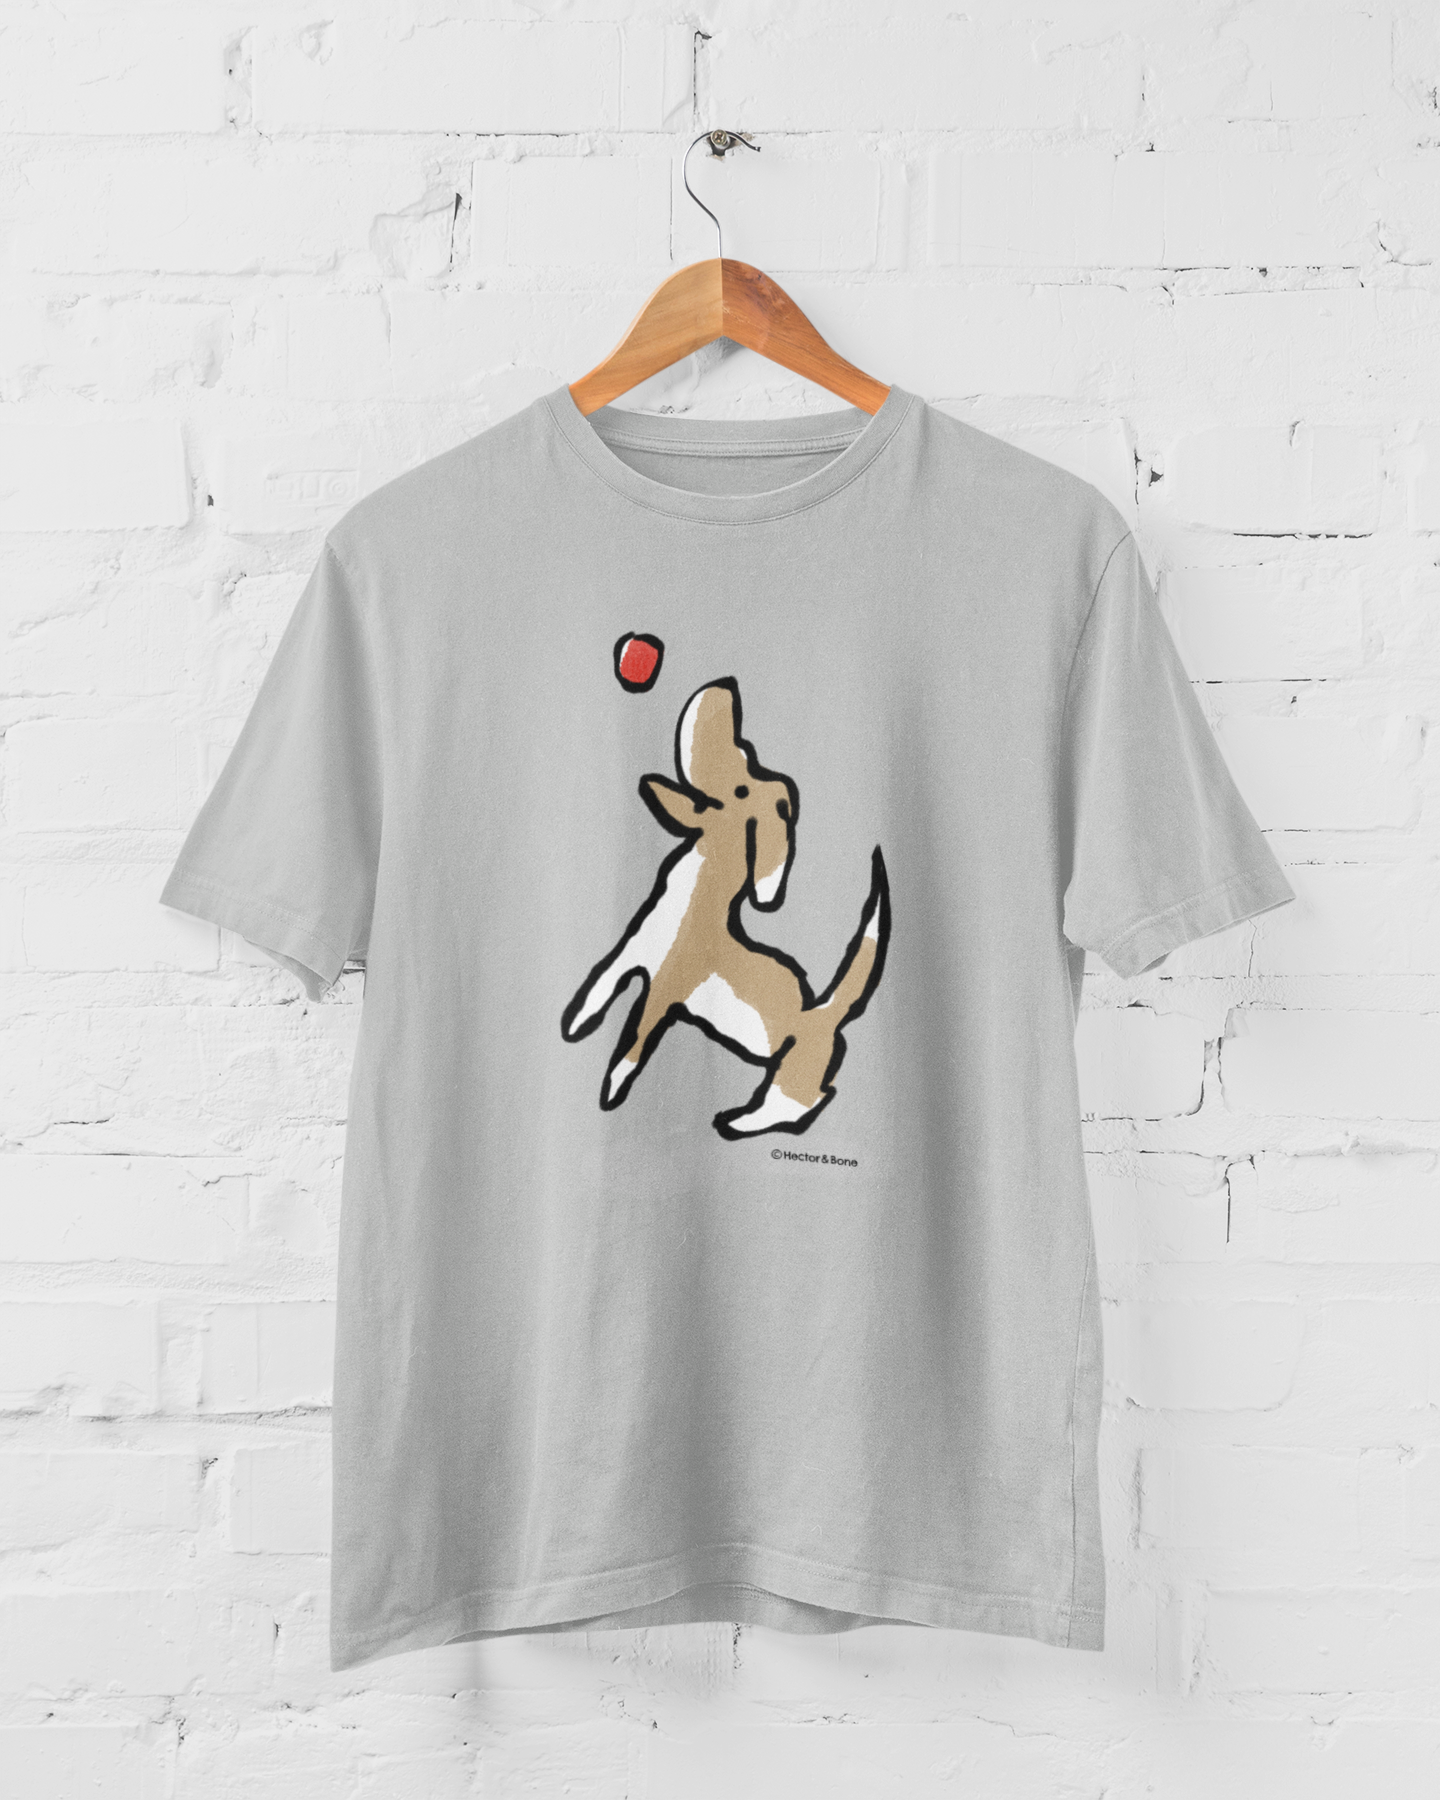 Dog T-shirt - Illustrated Jumping Dog T-shirts on heather grey vegan cotton by Hector and Bone